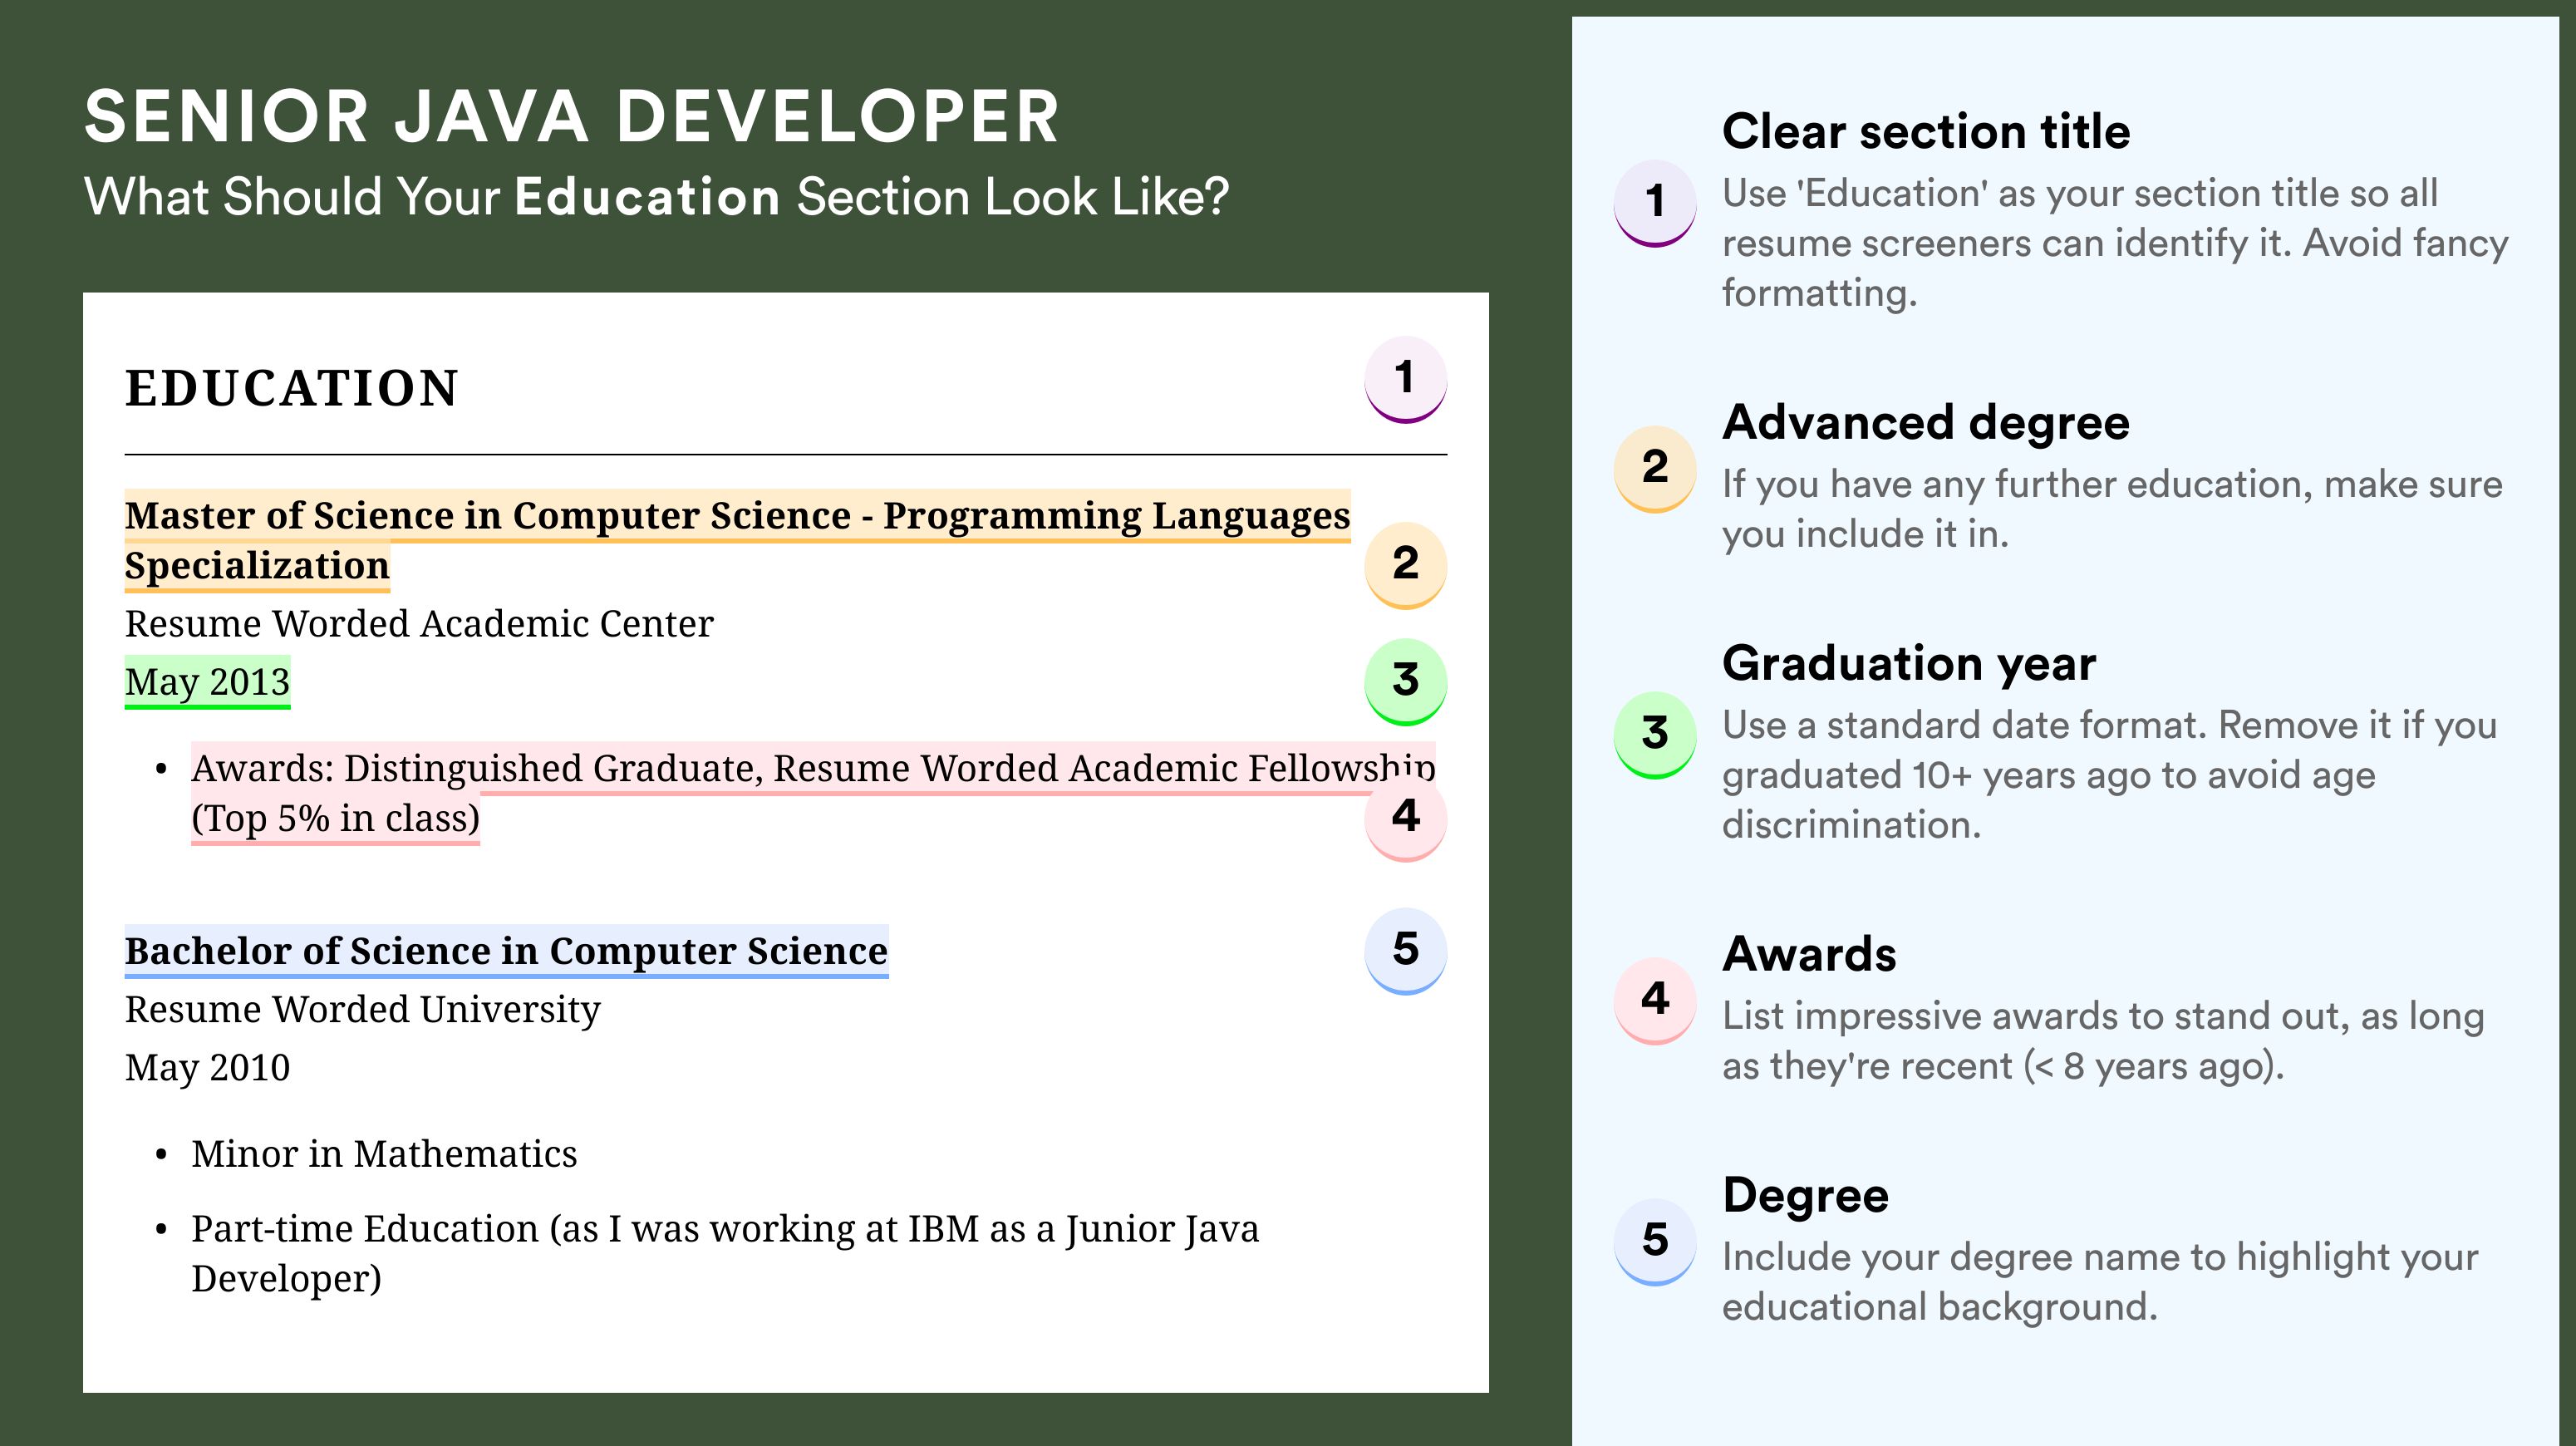 How To Write An Education Section - Senior Java Developer Roles